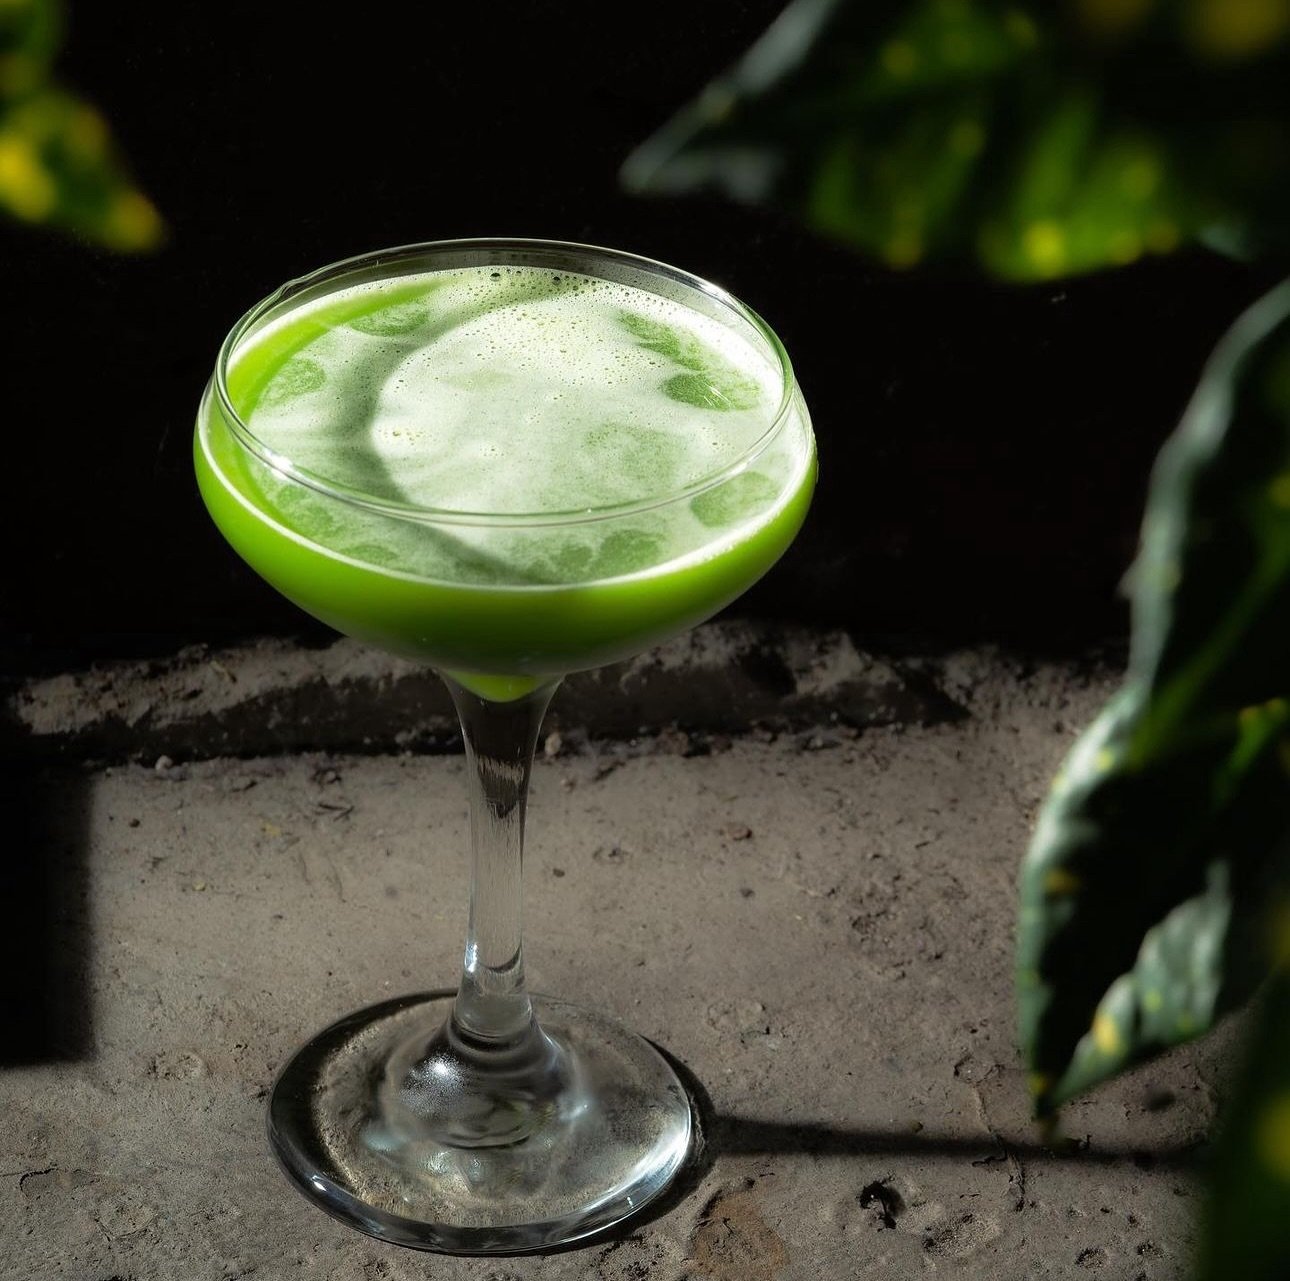 Stop by for one of your daily servings of vegetables &mdash; we&rsquo;ll be slinging this cocktail until sometime this summer!

The Green Mile
basil vodka, mesquite-smoked gin, sugar snap peas, lime, herbal bitters